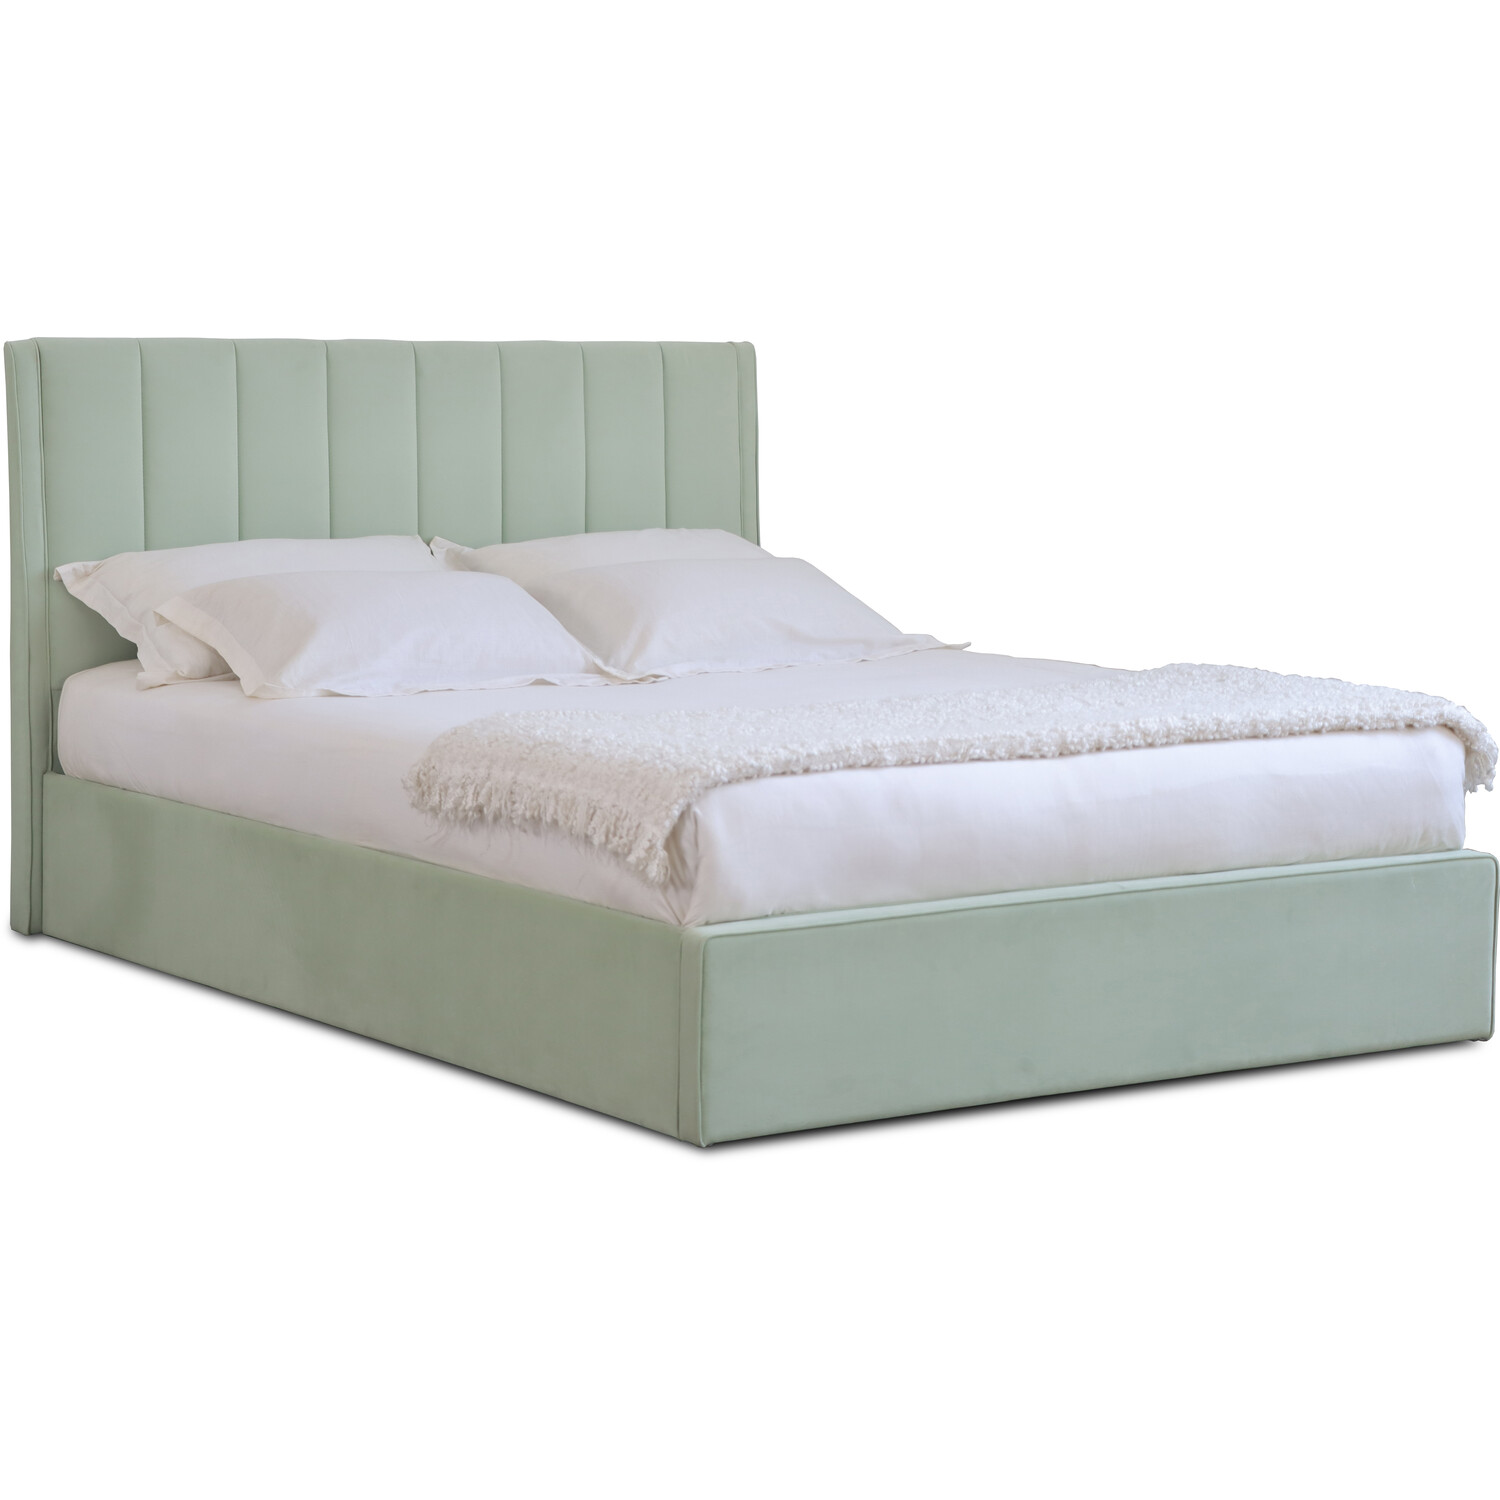 Willow Super King Size Mint Ottoman Bed Image 2